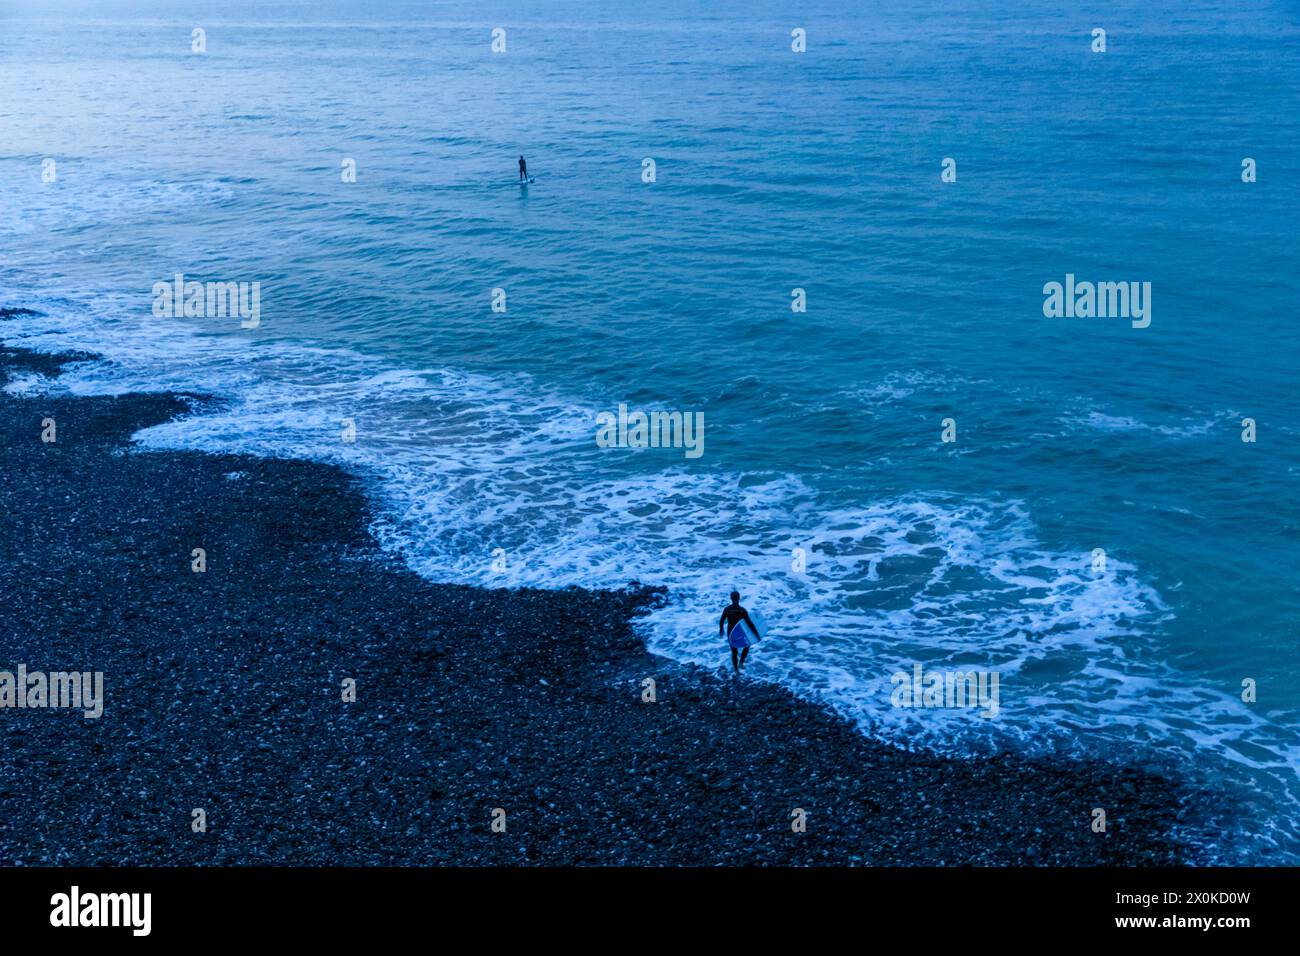 England, East Sussex, Eastbourne, South Downs National Park, Paddle Boarder and Surfer at Burling Gap Stock Photo